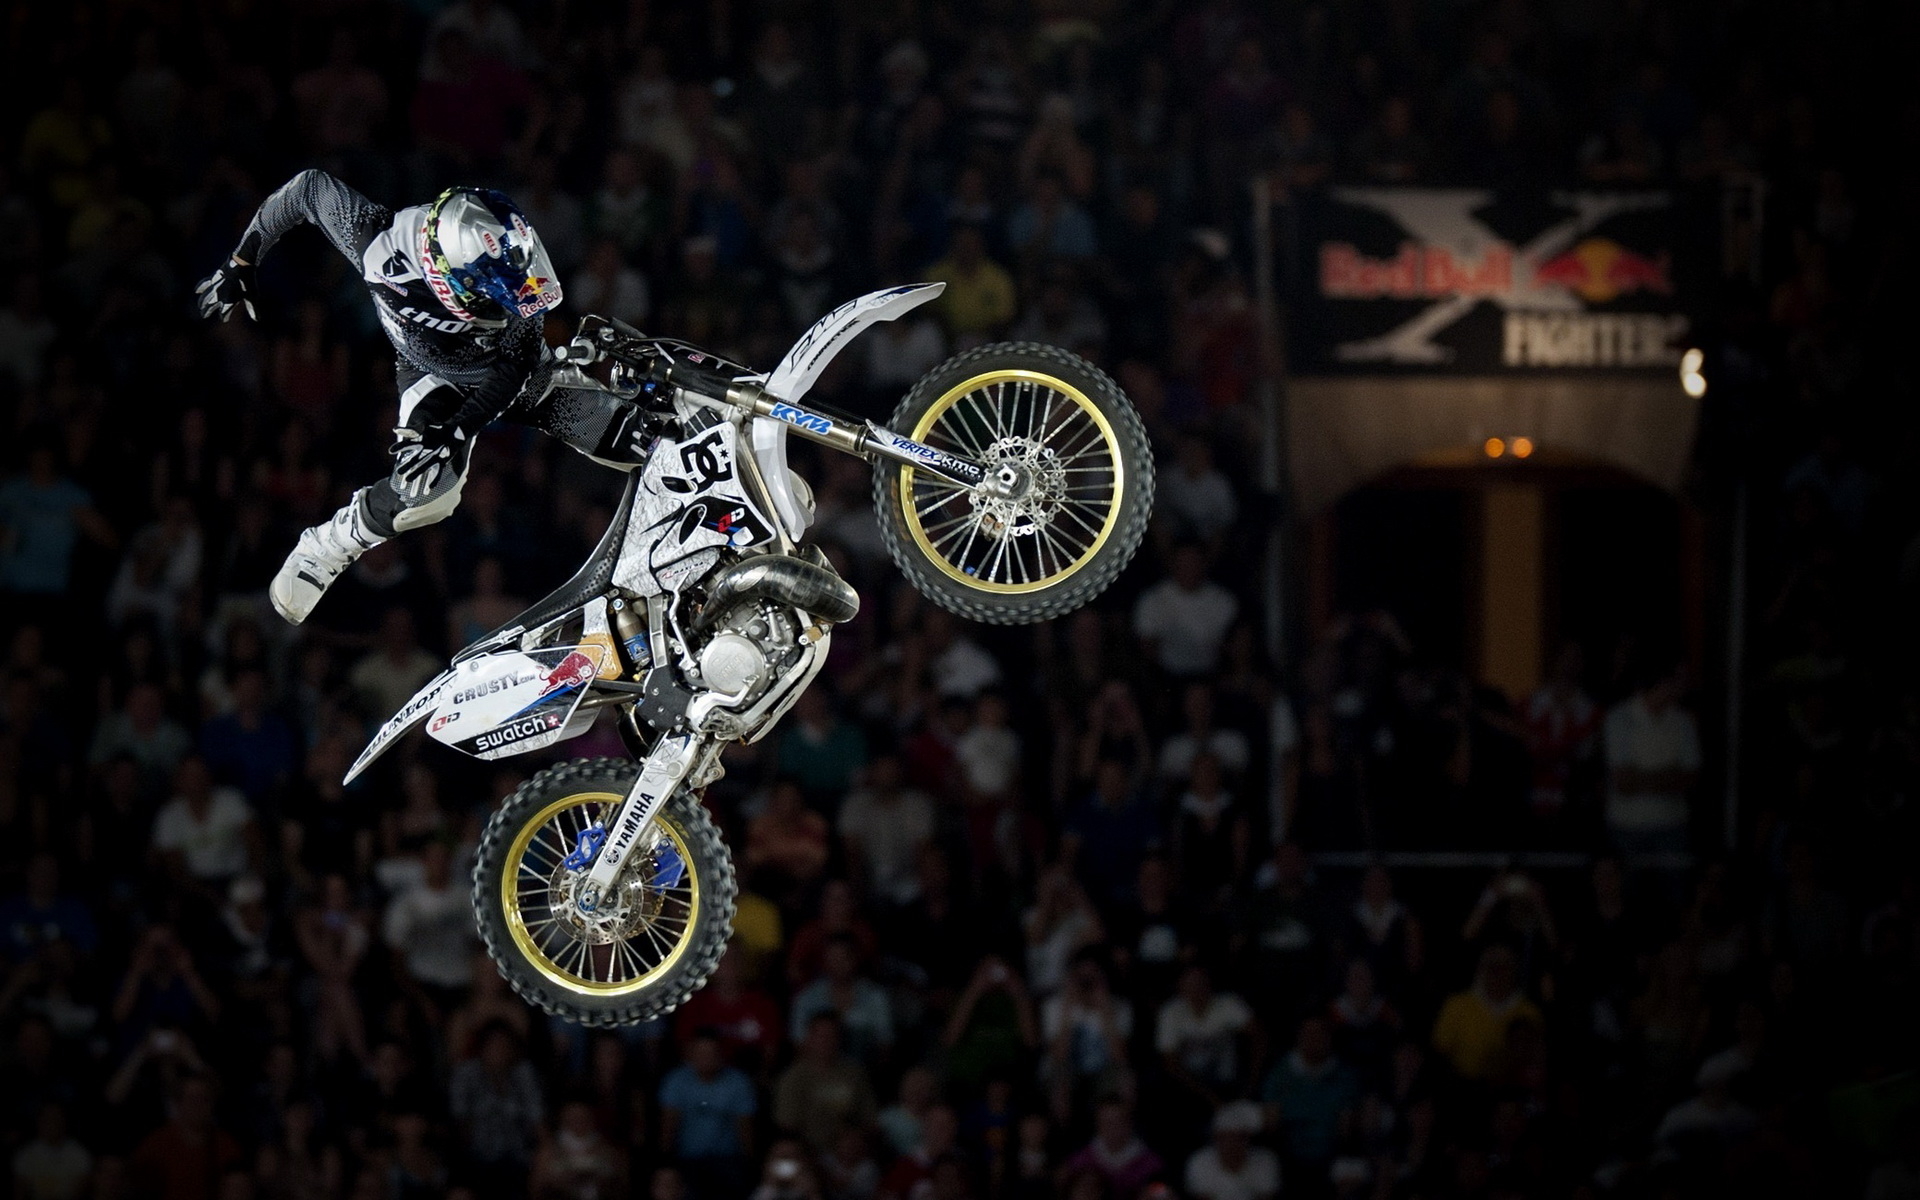 Red Bull X Fighters Wallpaper And Image Pictures